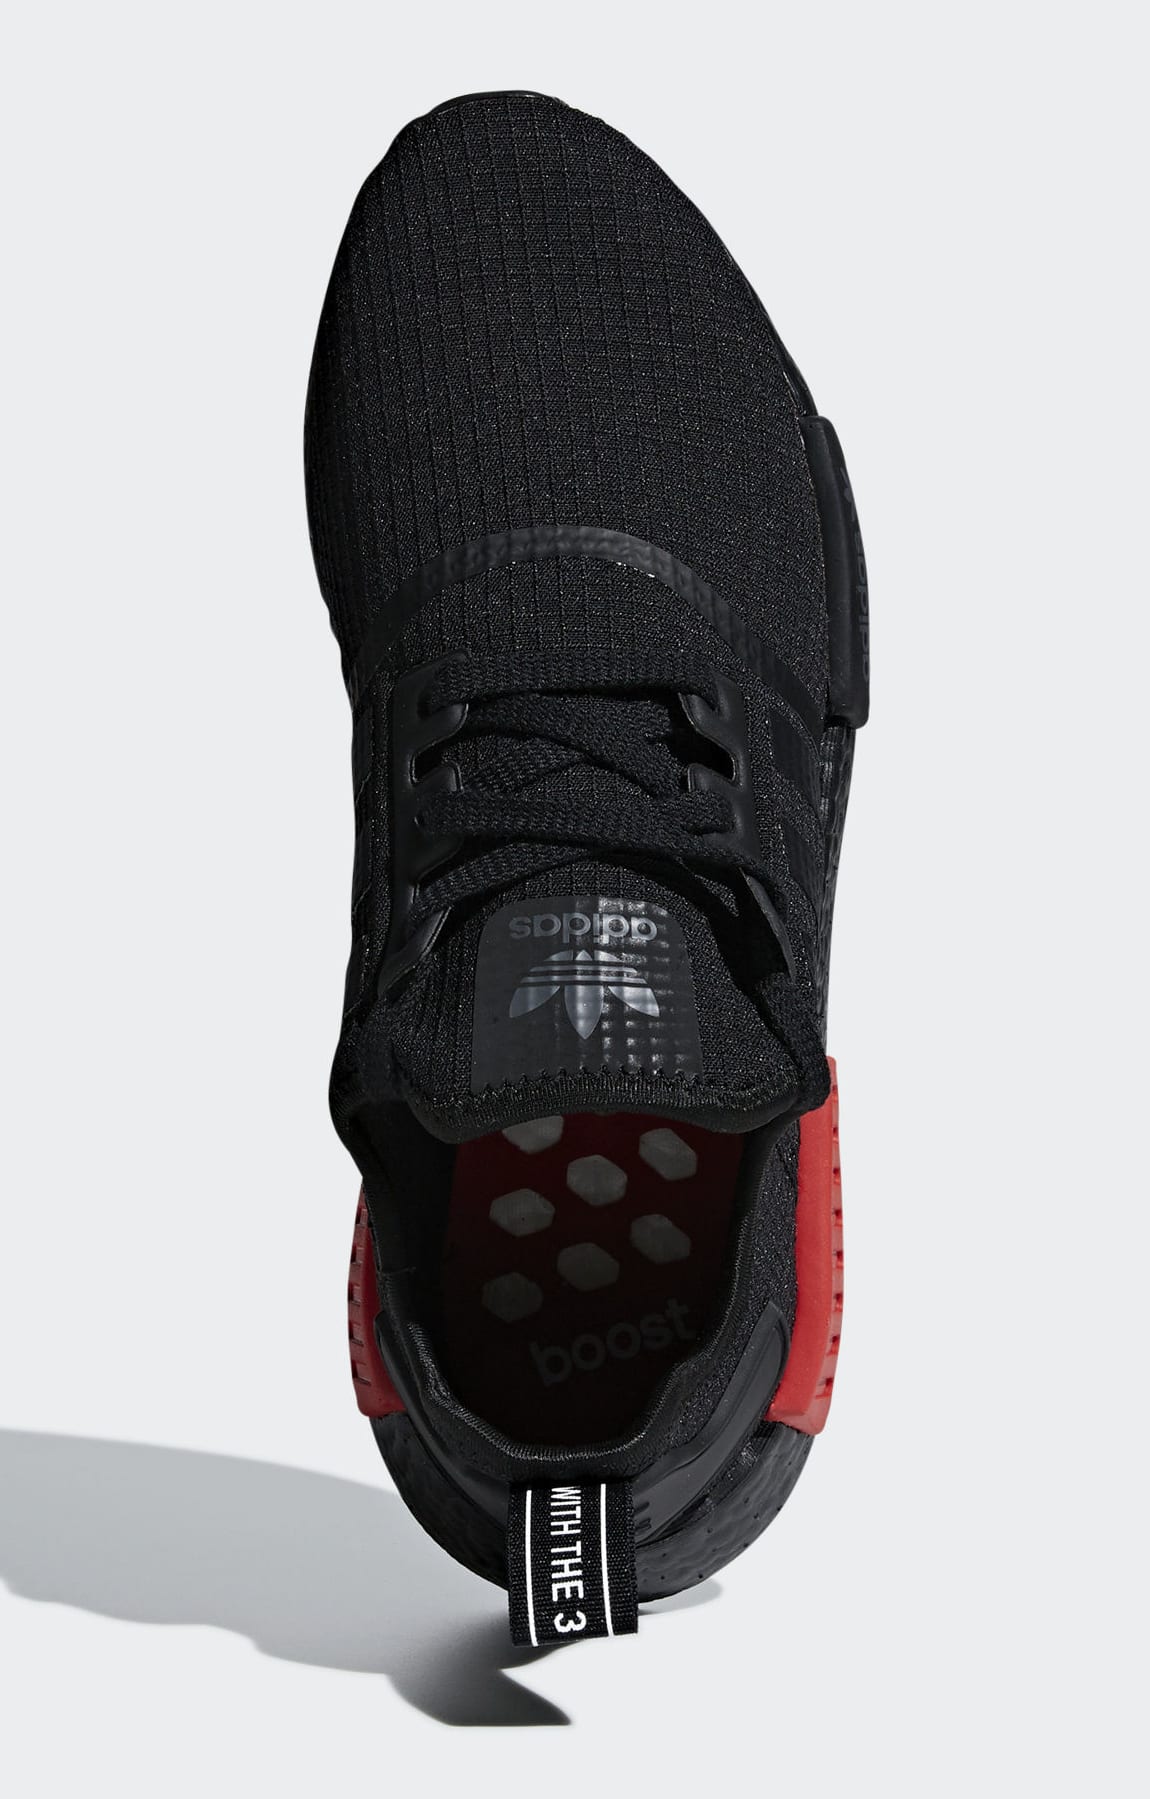 adidas NMD R1 Black Red GV8422 Release Date - SBD